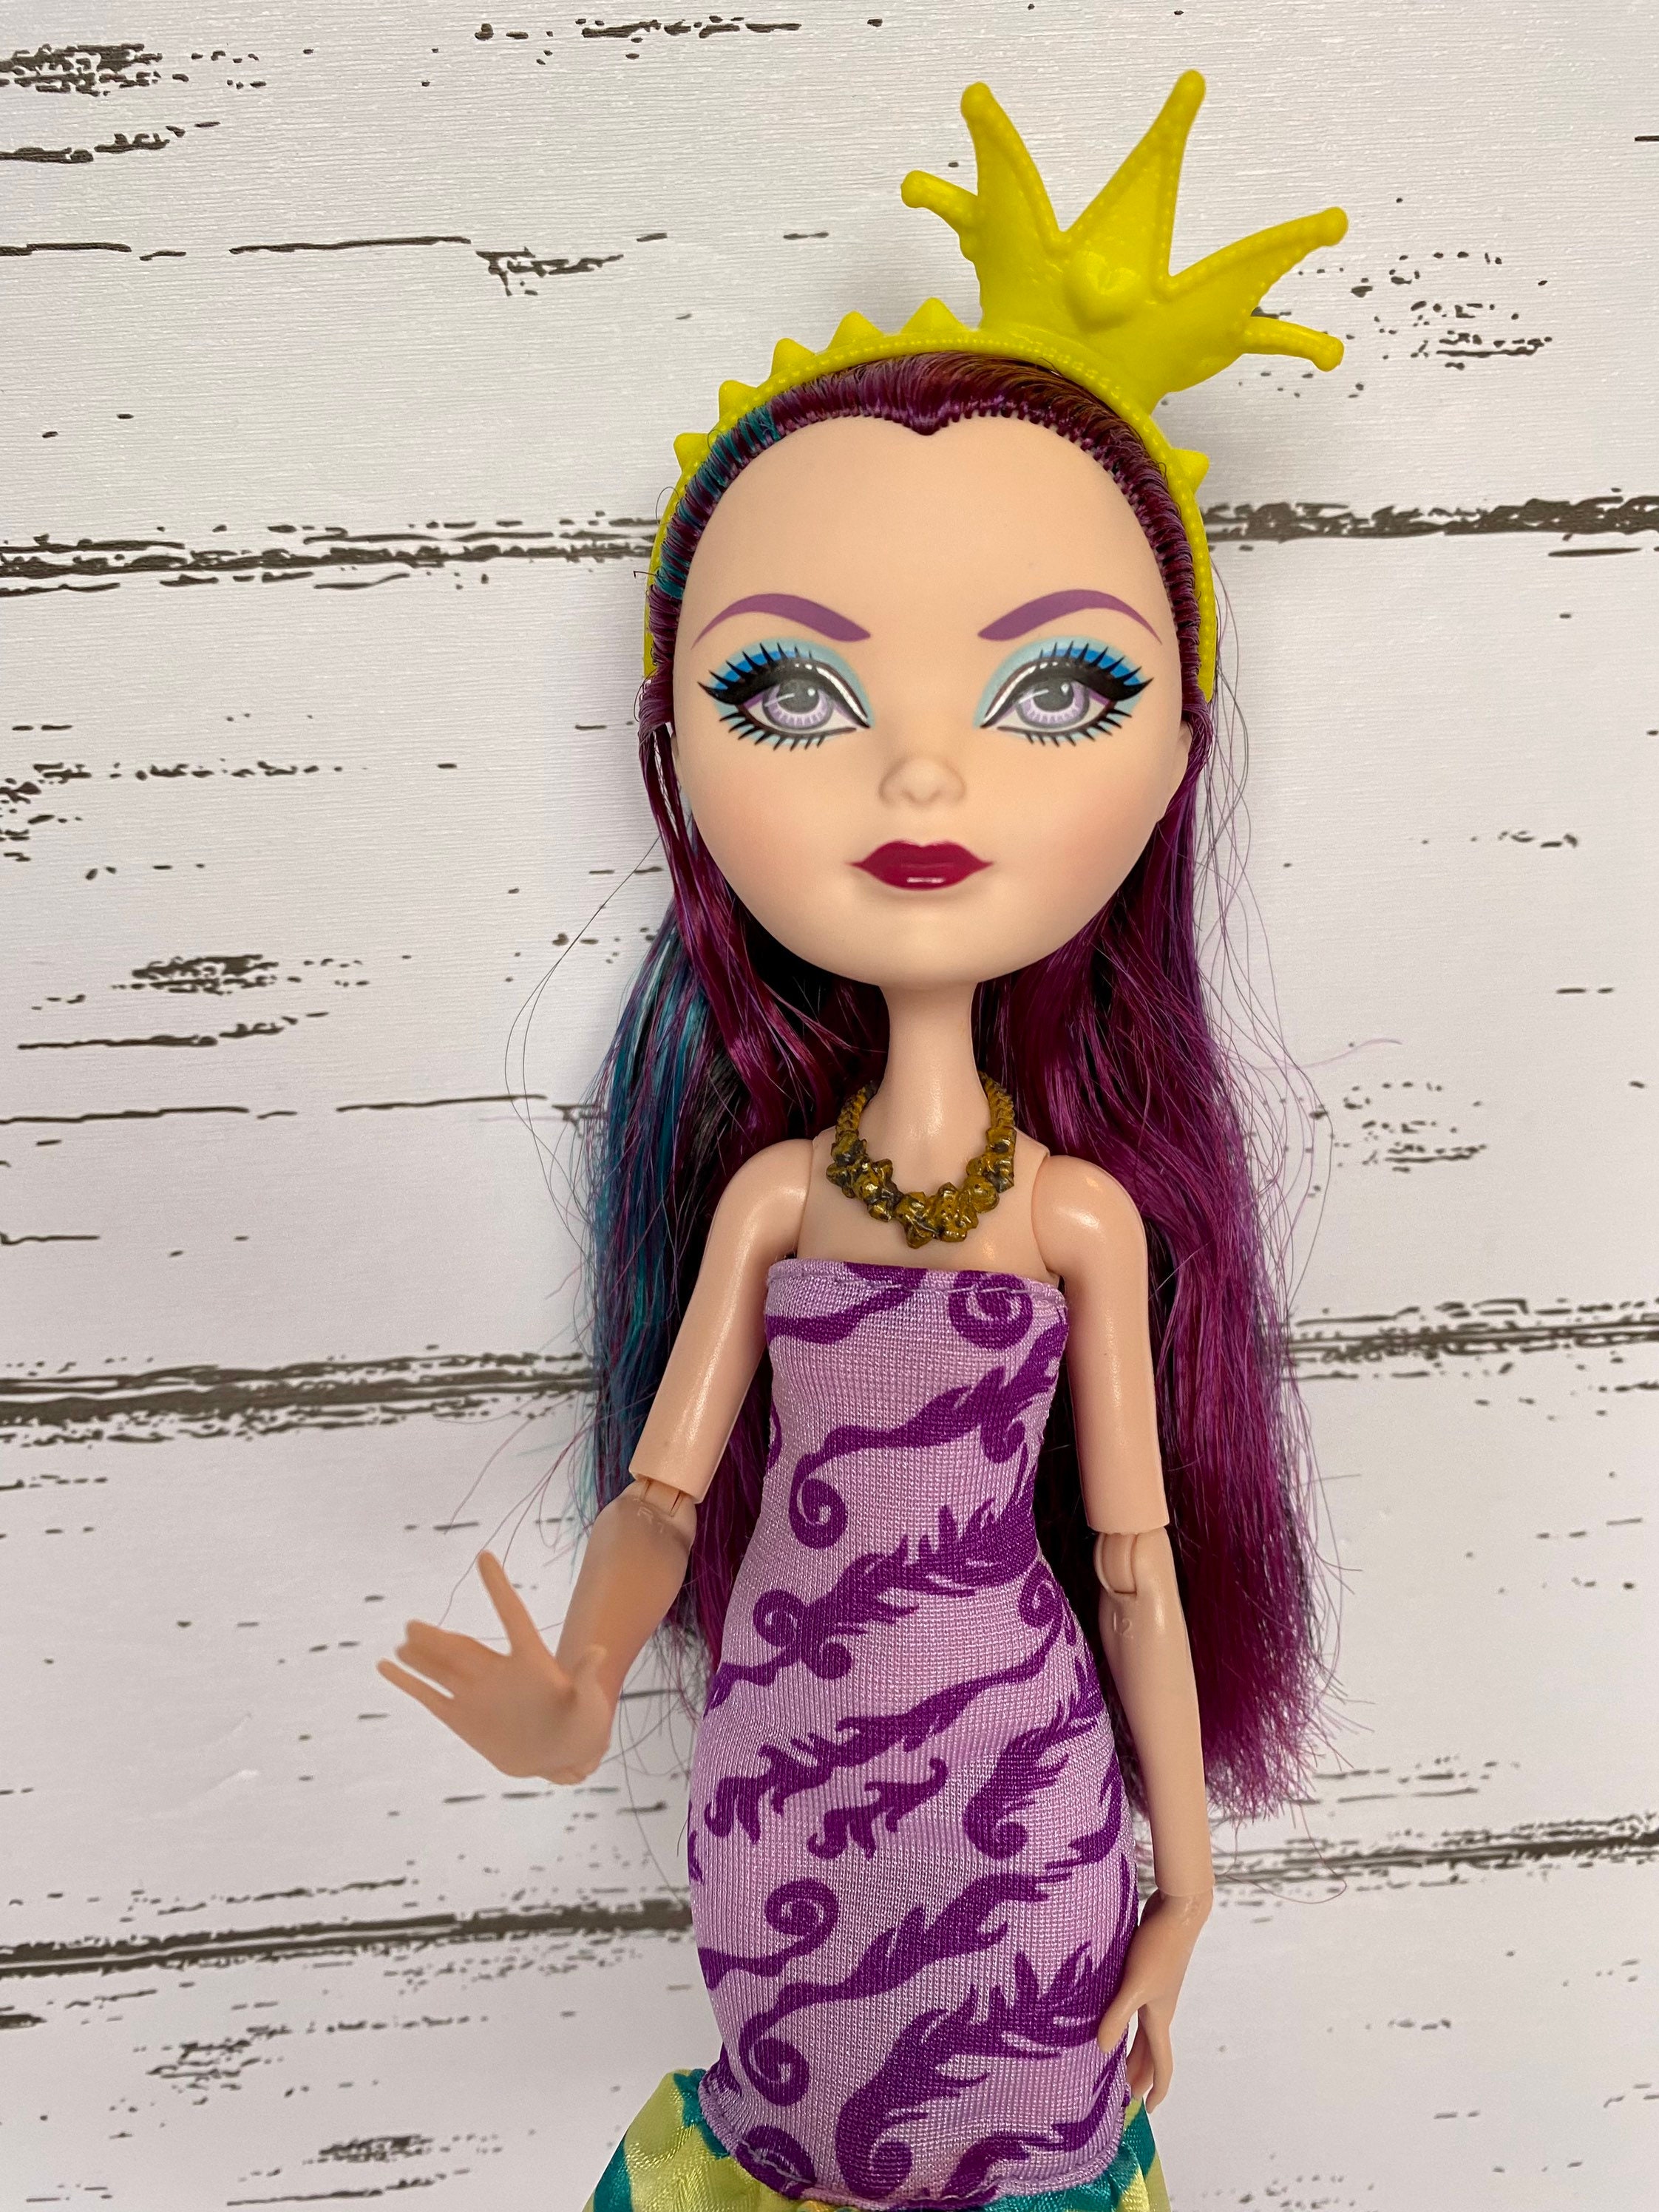 Ever After High:Raven Queen for Sale in Rogersville, TN - OfferUp